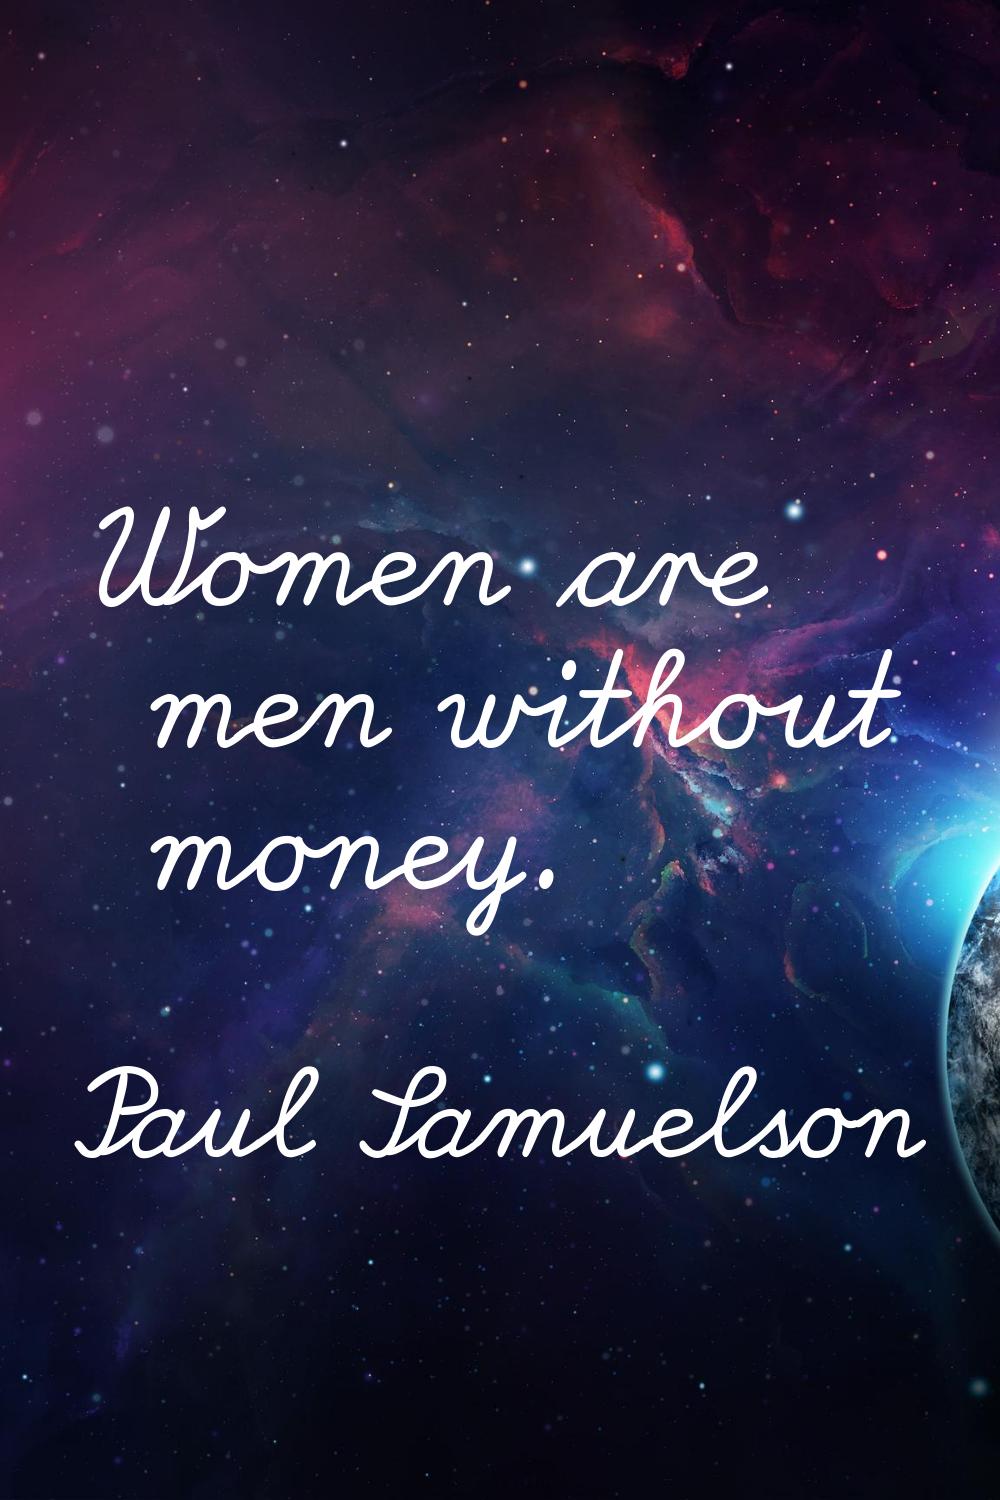 Women are men without money.